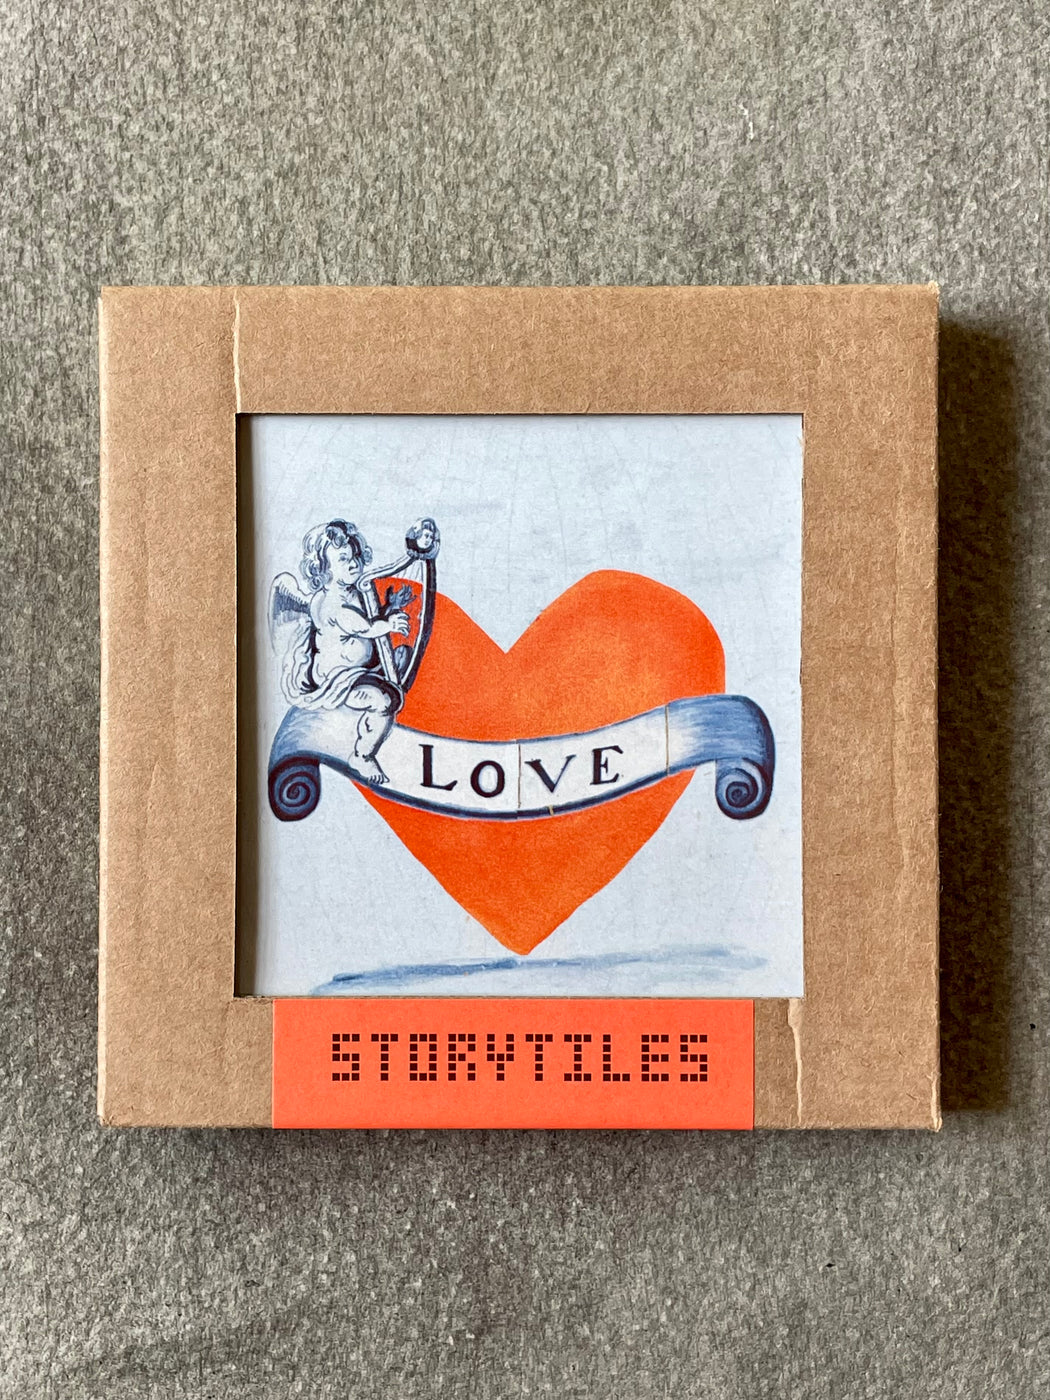 "With All My Heart" Story Tile by Marga Van Oers